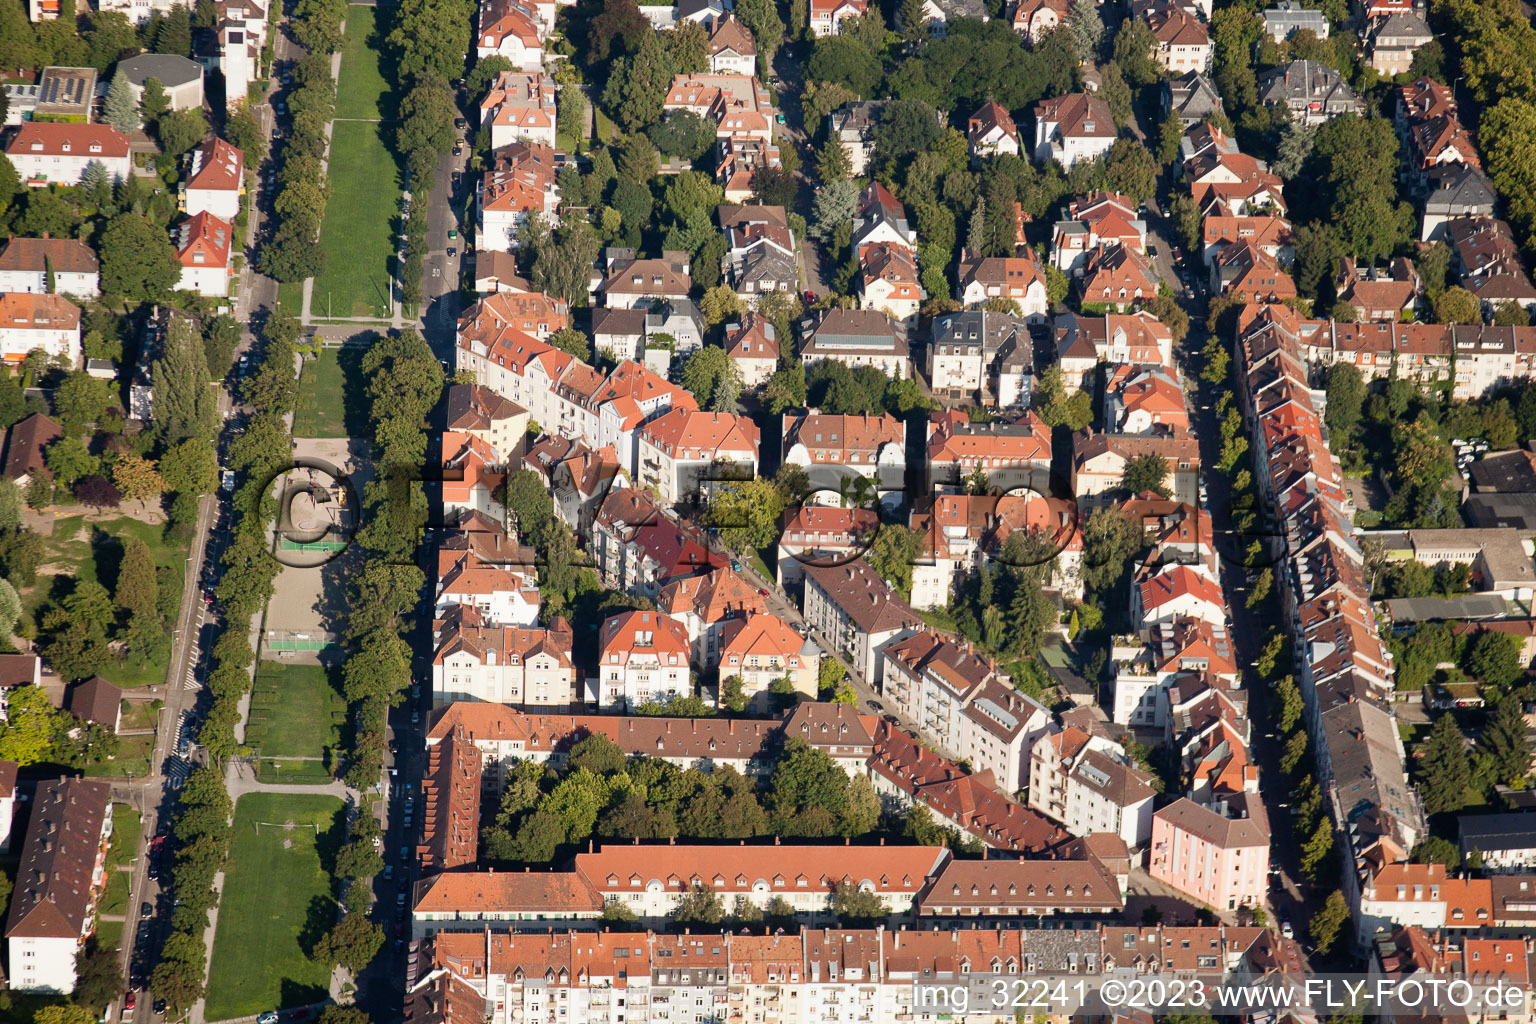 District Mühlburg in Karlsruhe in the state Baden-Wuerttemberg, Germany from the drone perspective